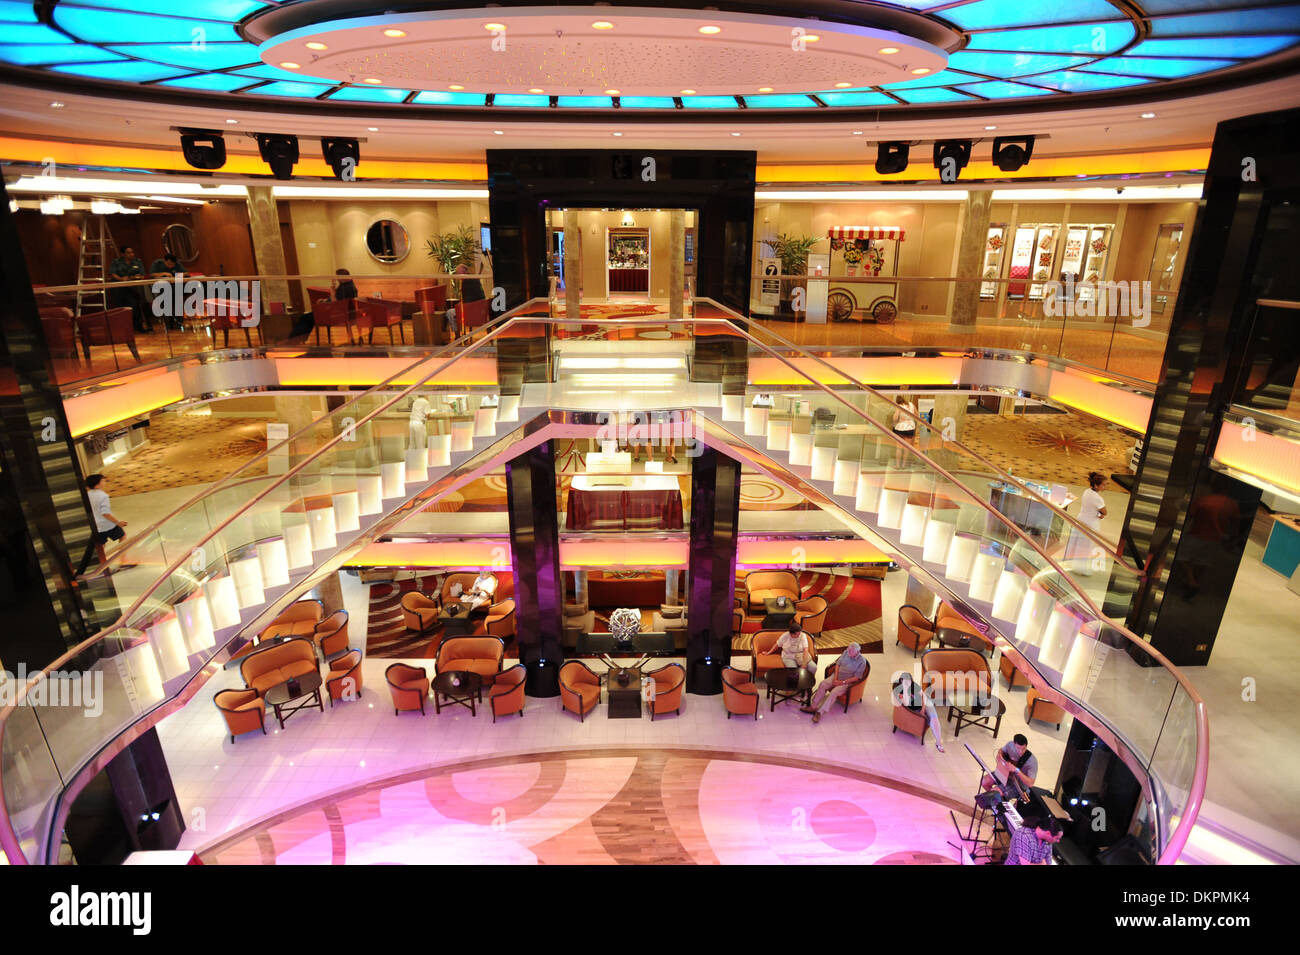 A general view of the atrium on the P&O cruise ship Ventura. Stock Photo